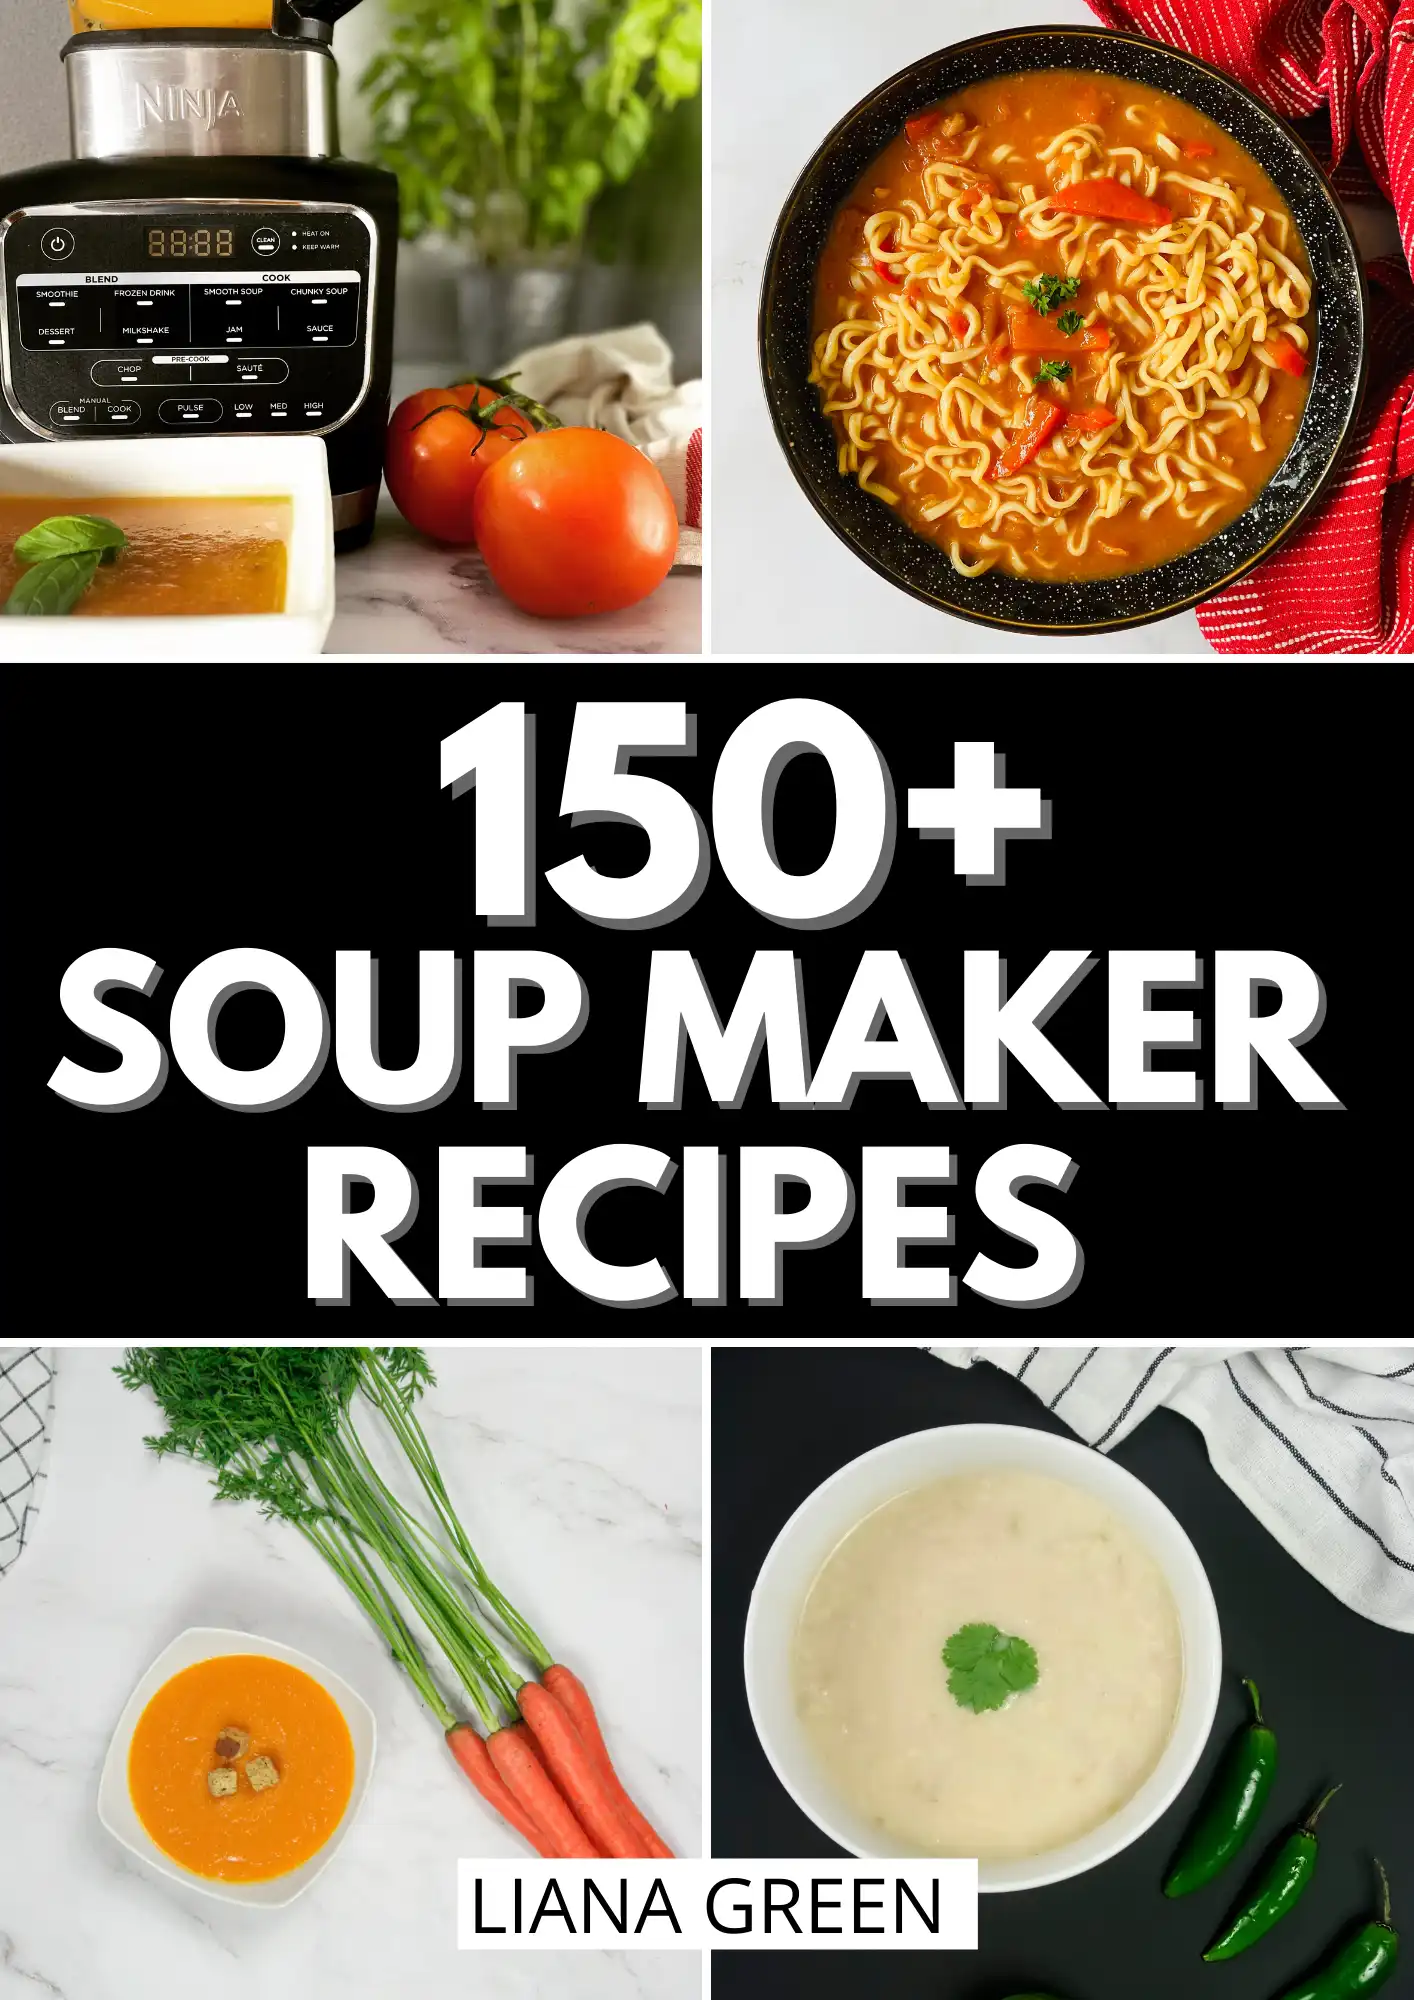 150+ Soup Maker Recipes (ONLY £3 INC FREE UPDATES)